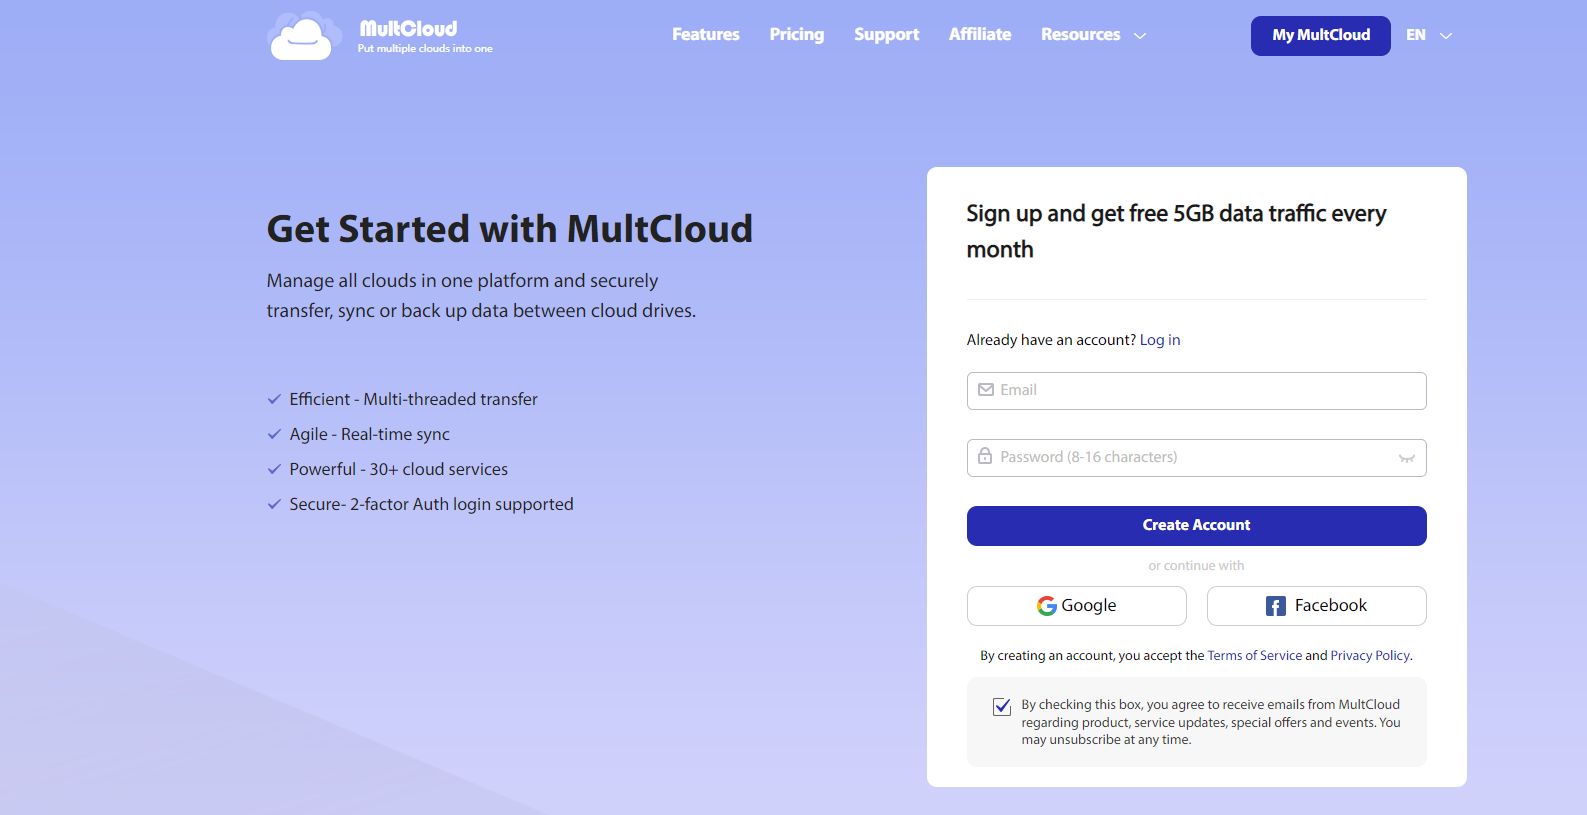 Sync Amazon S3 to Google Drive with MultCloud?